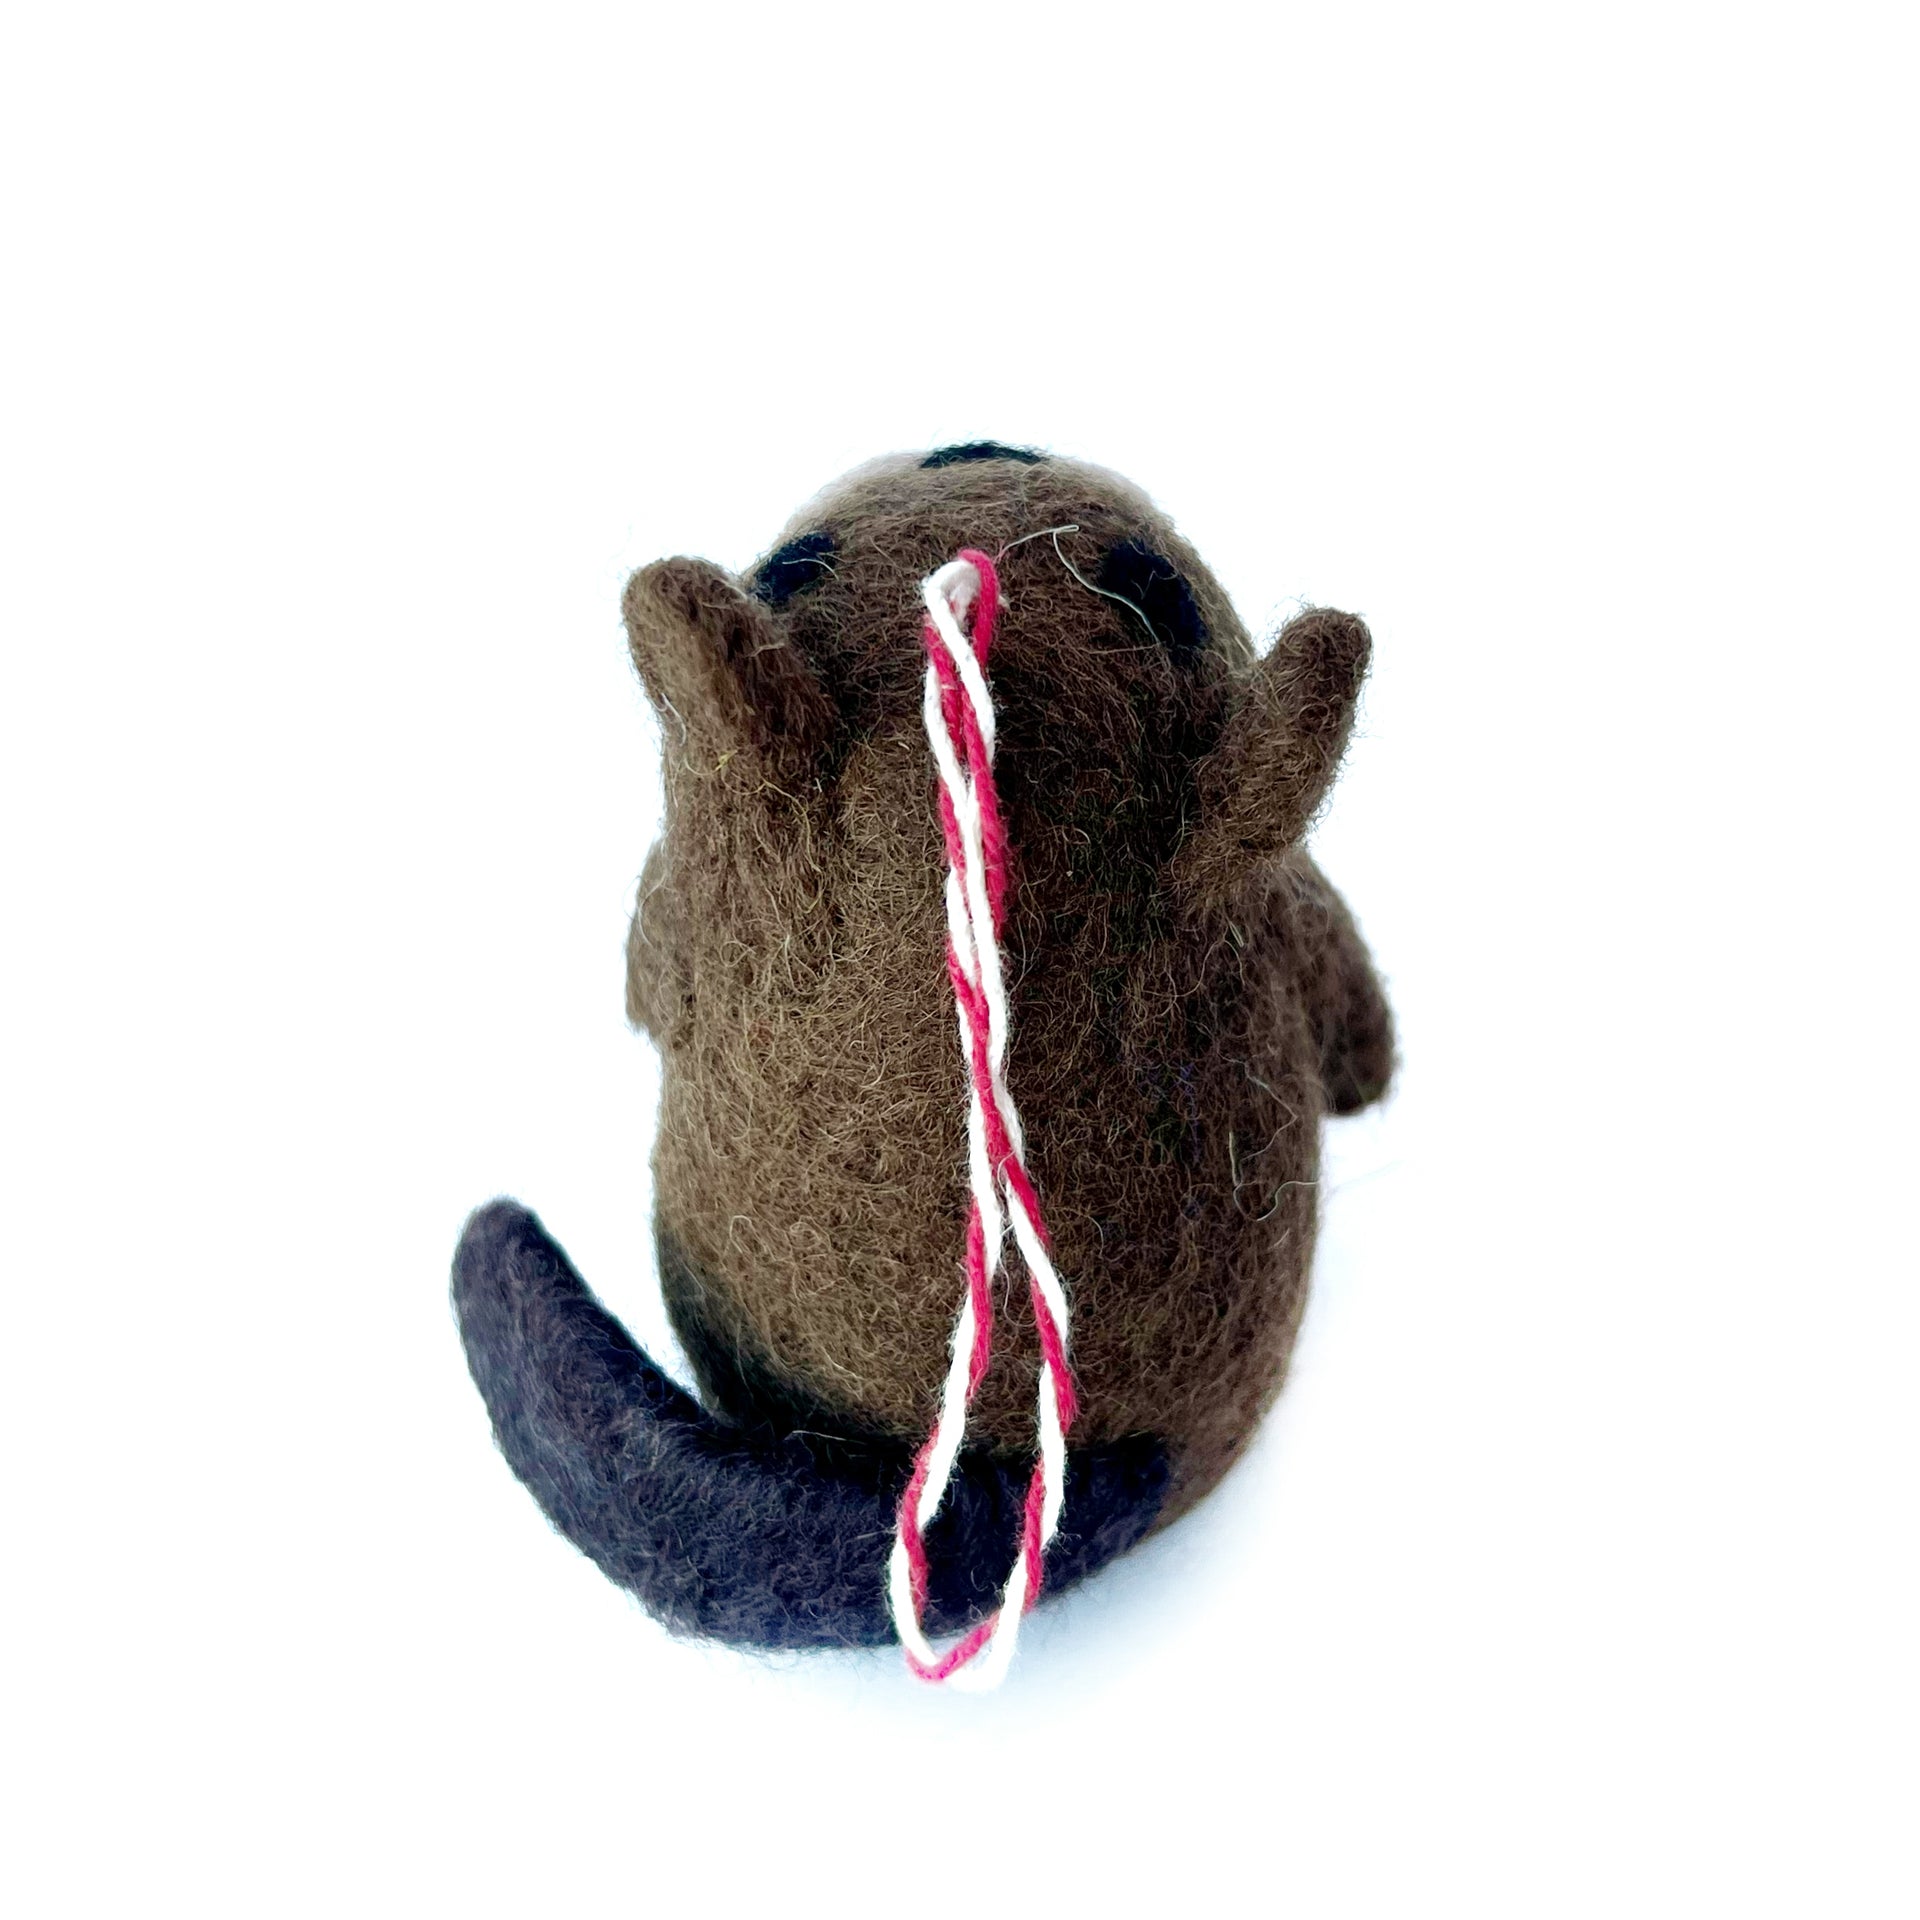 Beaver with Holly Ornament, Tufted Wool